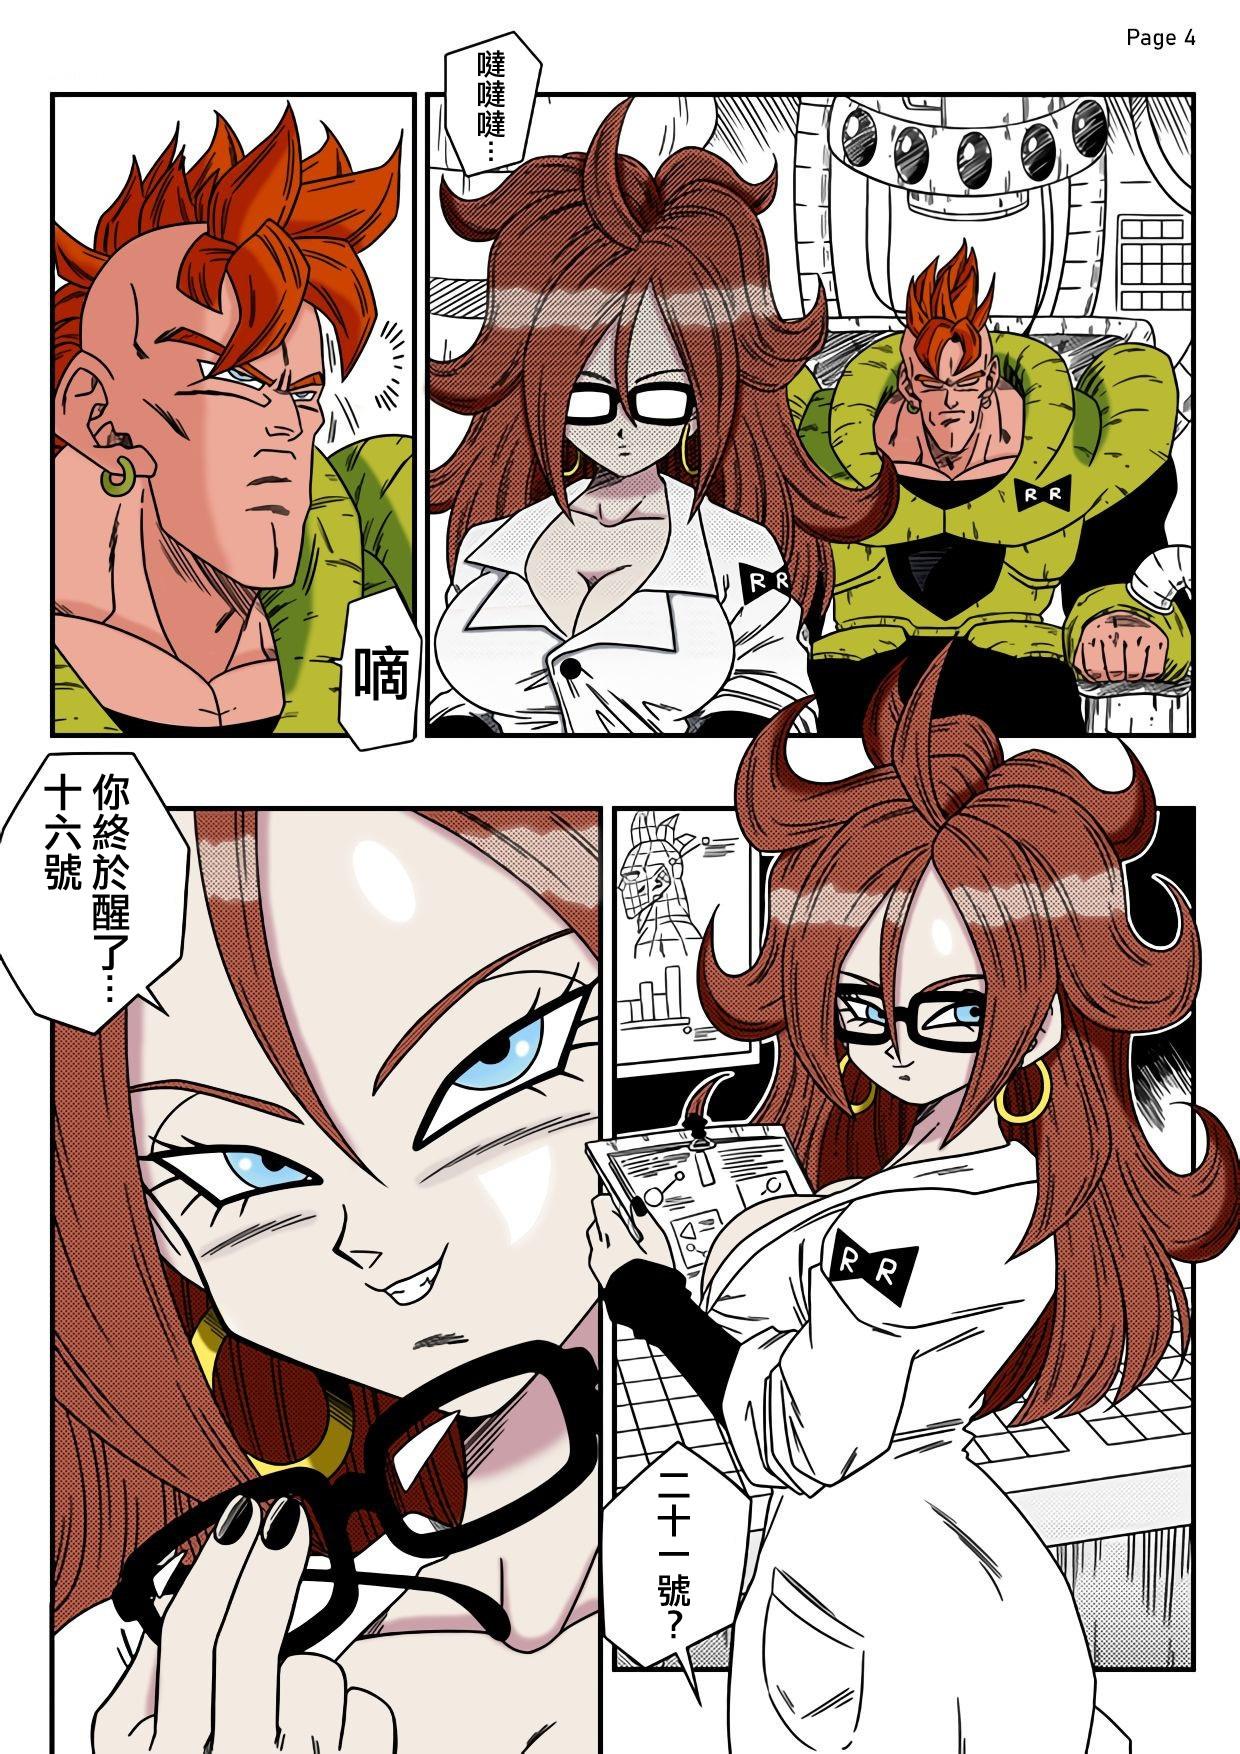 Kyonyuu Android Sekai Seiha o Netsubou!! Android 21 Shutsugen!! | Busty Android Wants to Dominate the World! 4